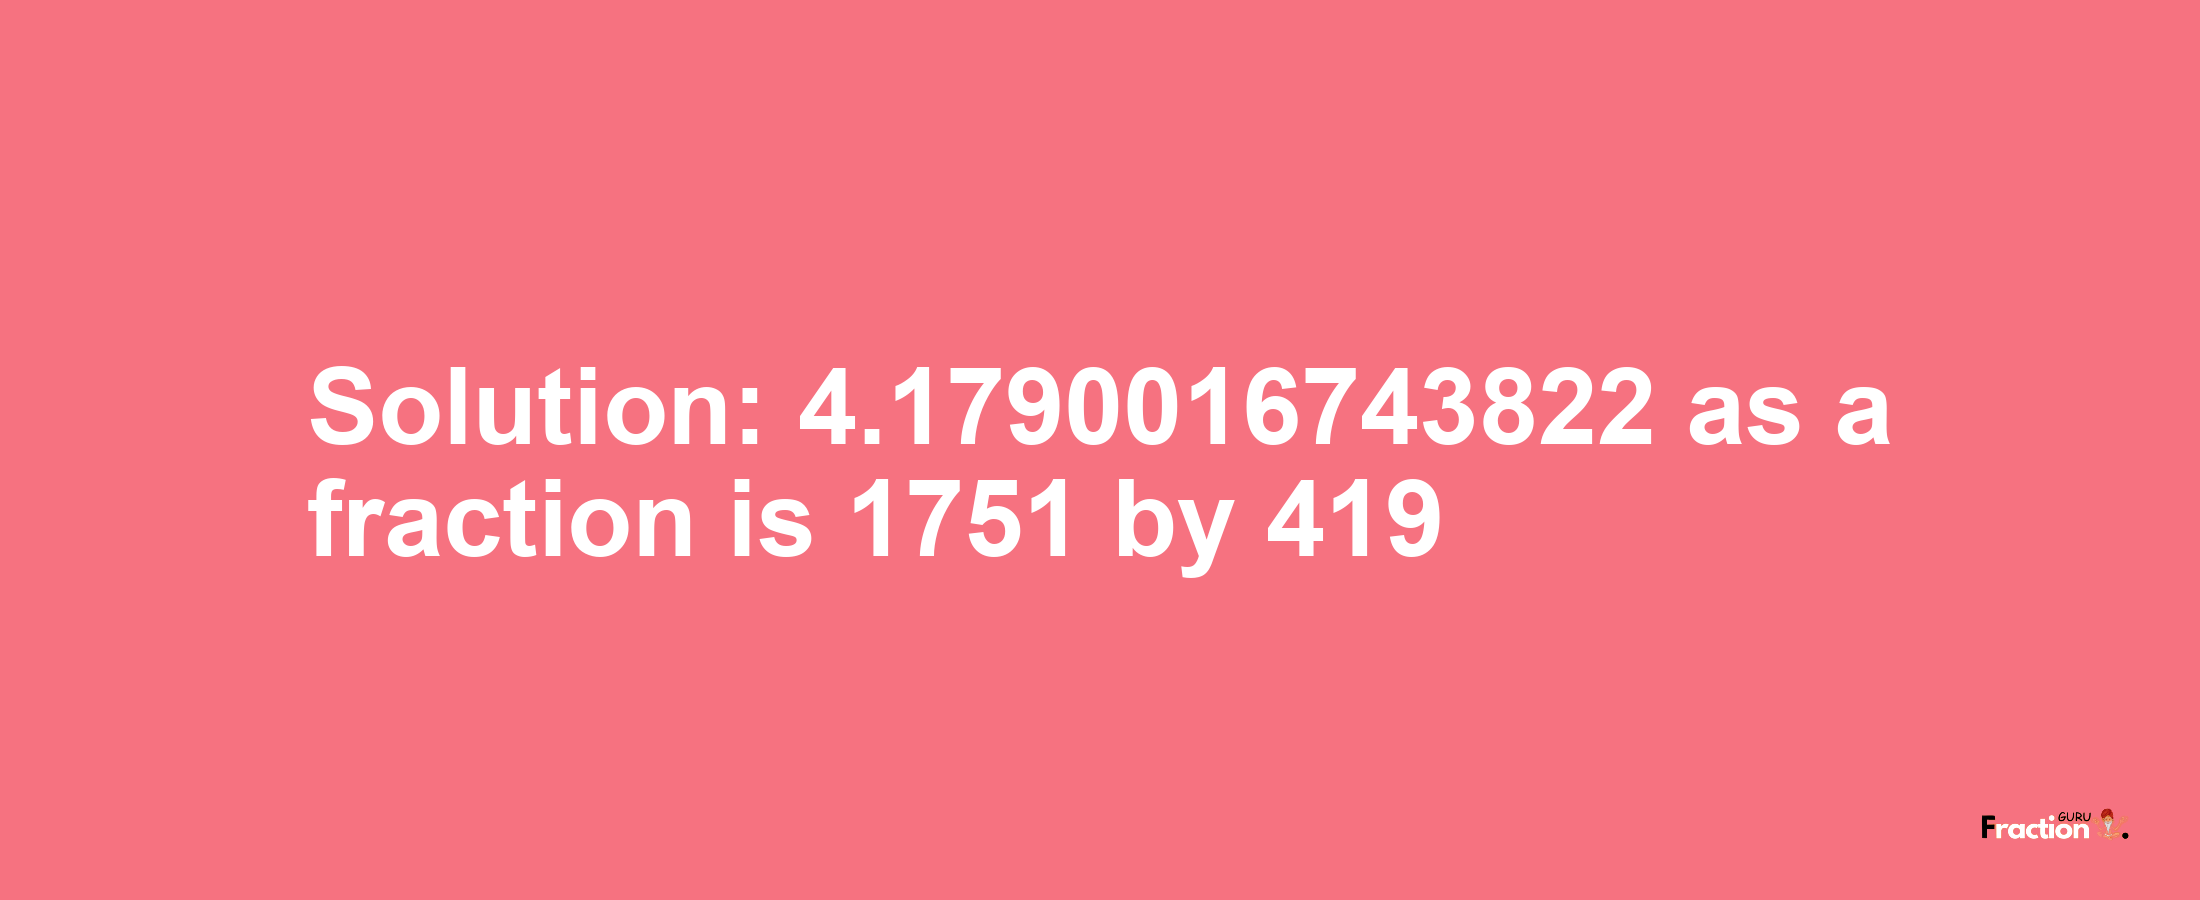 Solution:4.1790016743822 as a fraction is 1751/419